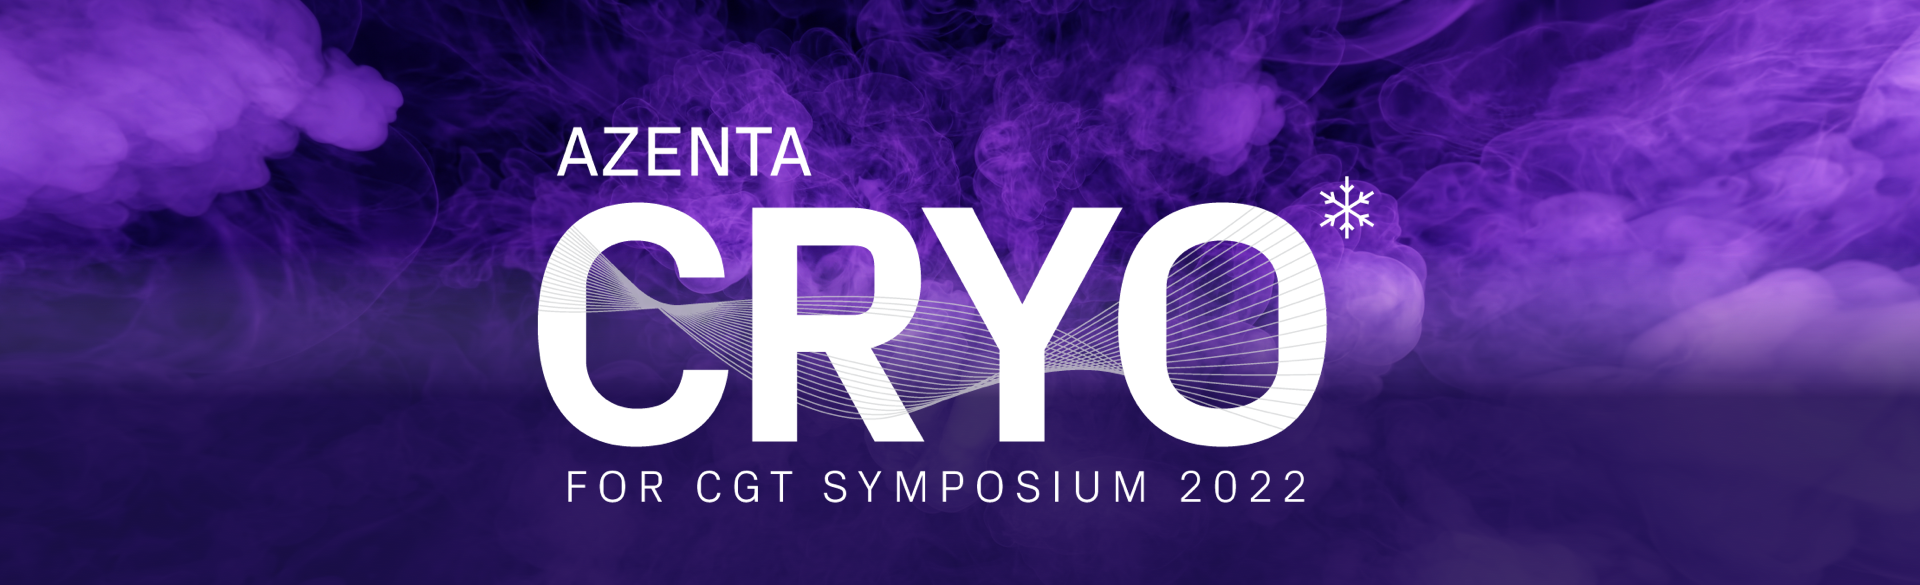 Azenta Cryo Symposium for Cell and Gene Therapy 2022